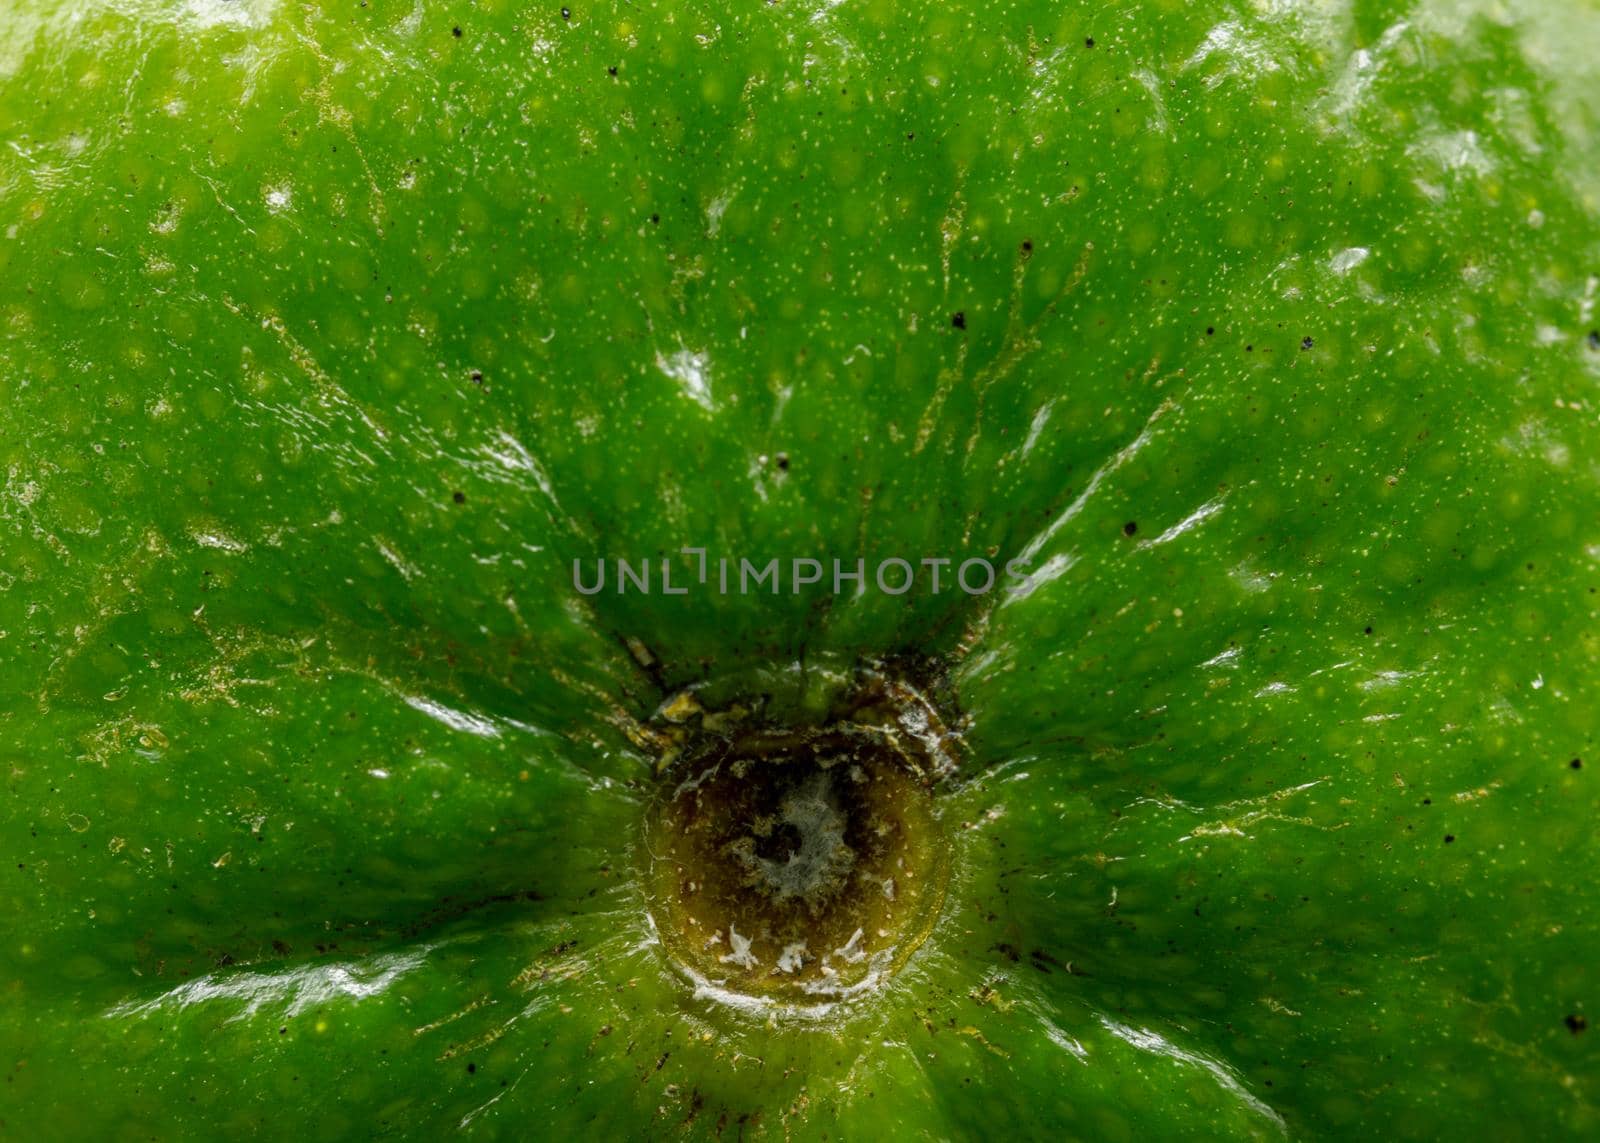 Green lime citruss fruit peel textured with black dots, macro photo, black background